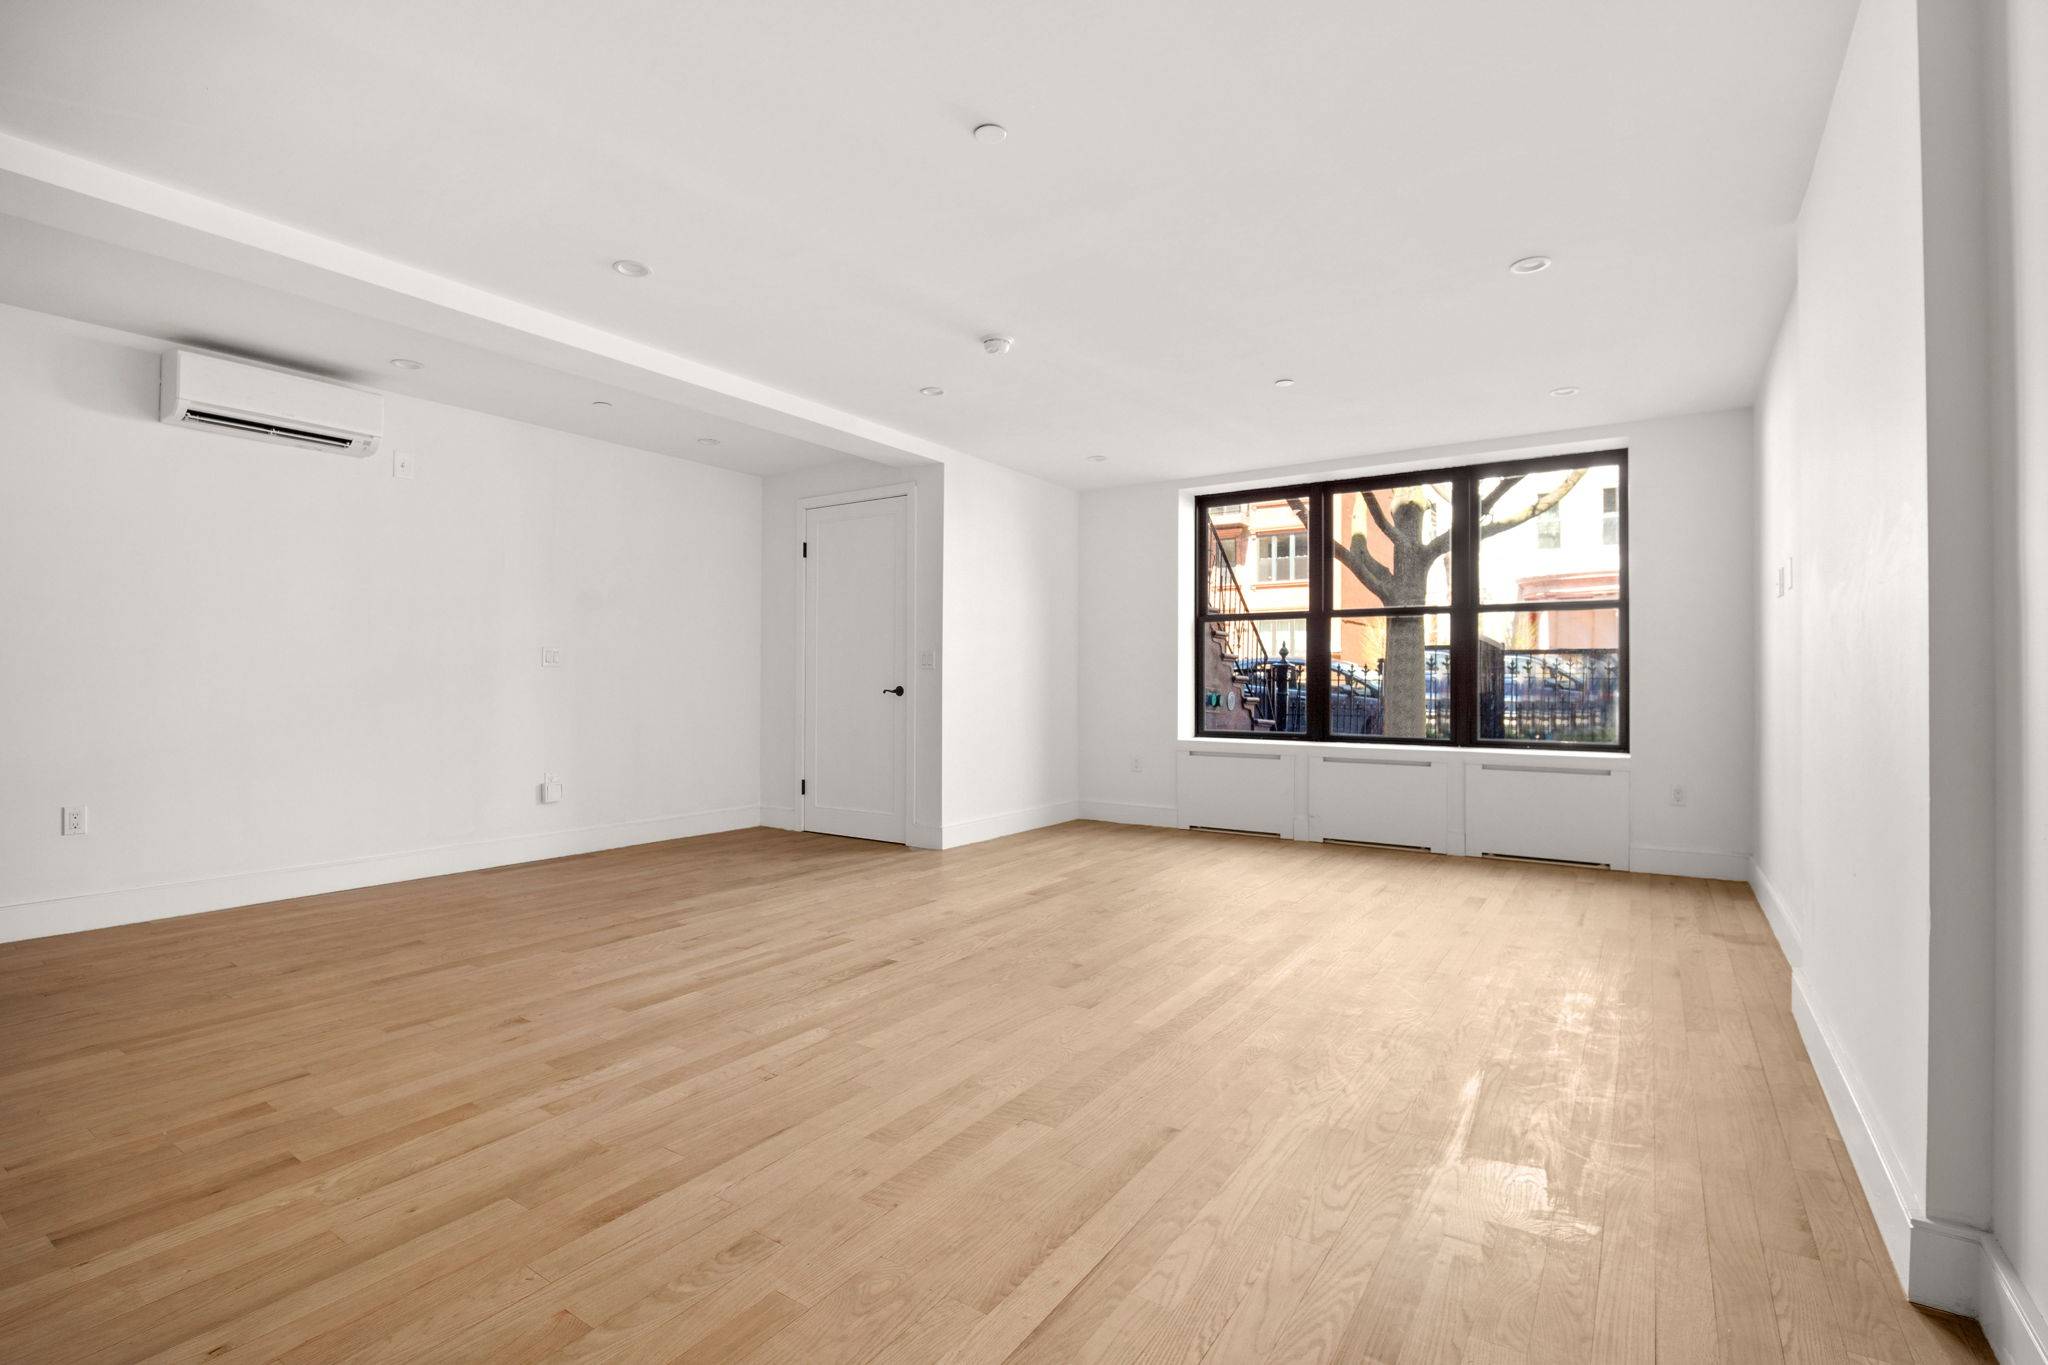 Be the first to live in this brand new gut renovated two bedrooms two bathroom garden apartment in one of Bed Stuy's most beautiful brownstones.